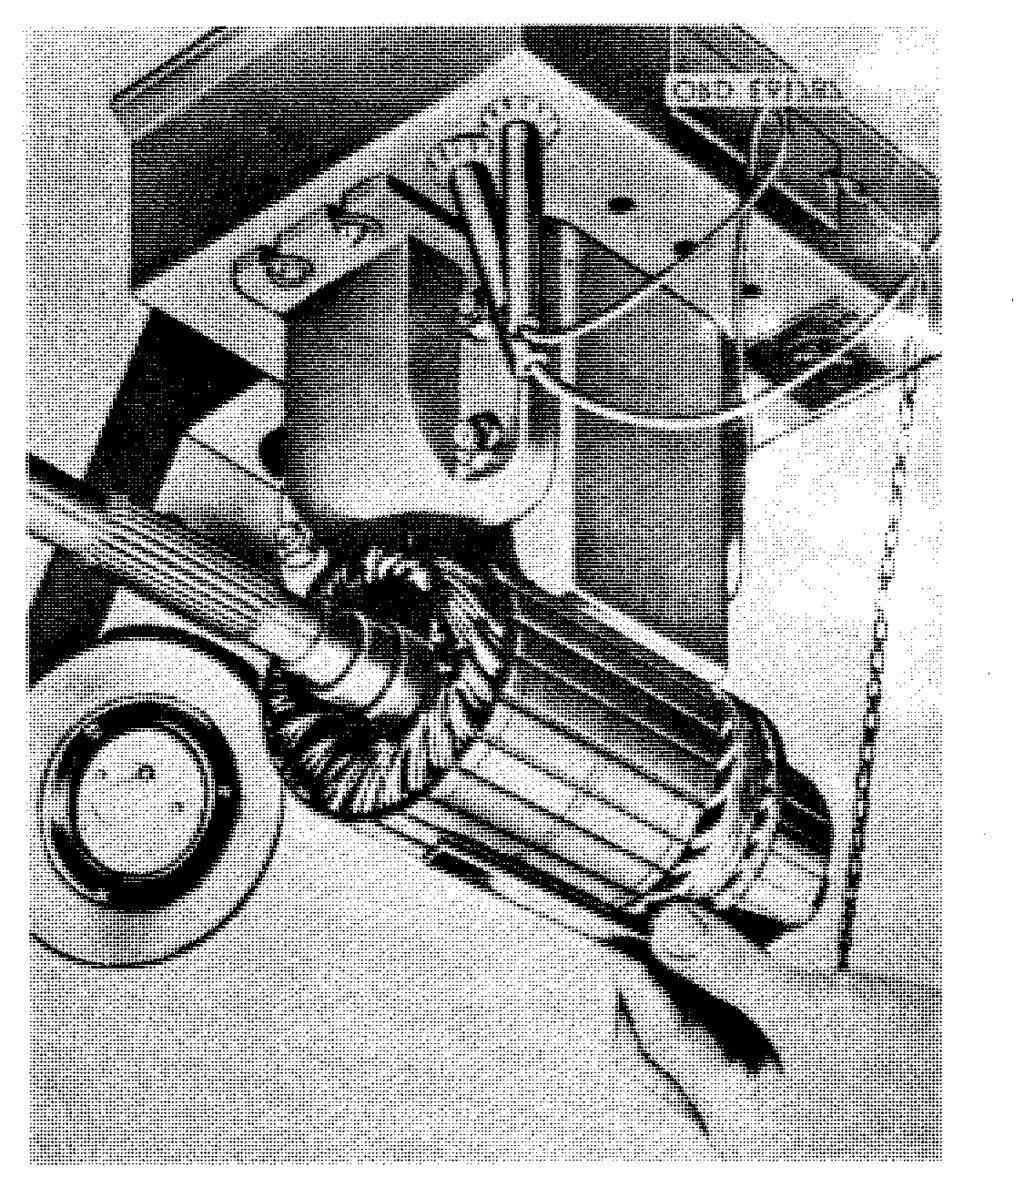 (4) Inspect armature shaft alinement and commutator for eccentricity to shaft with a lathe or V-blocks and a dial indicator (fig.